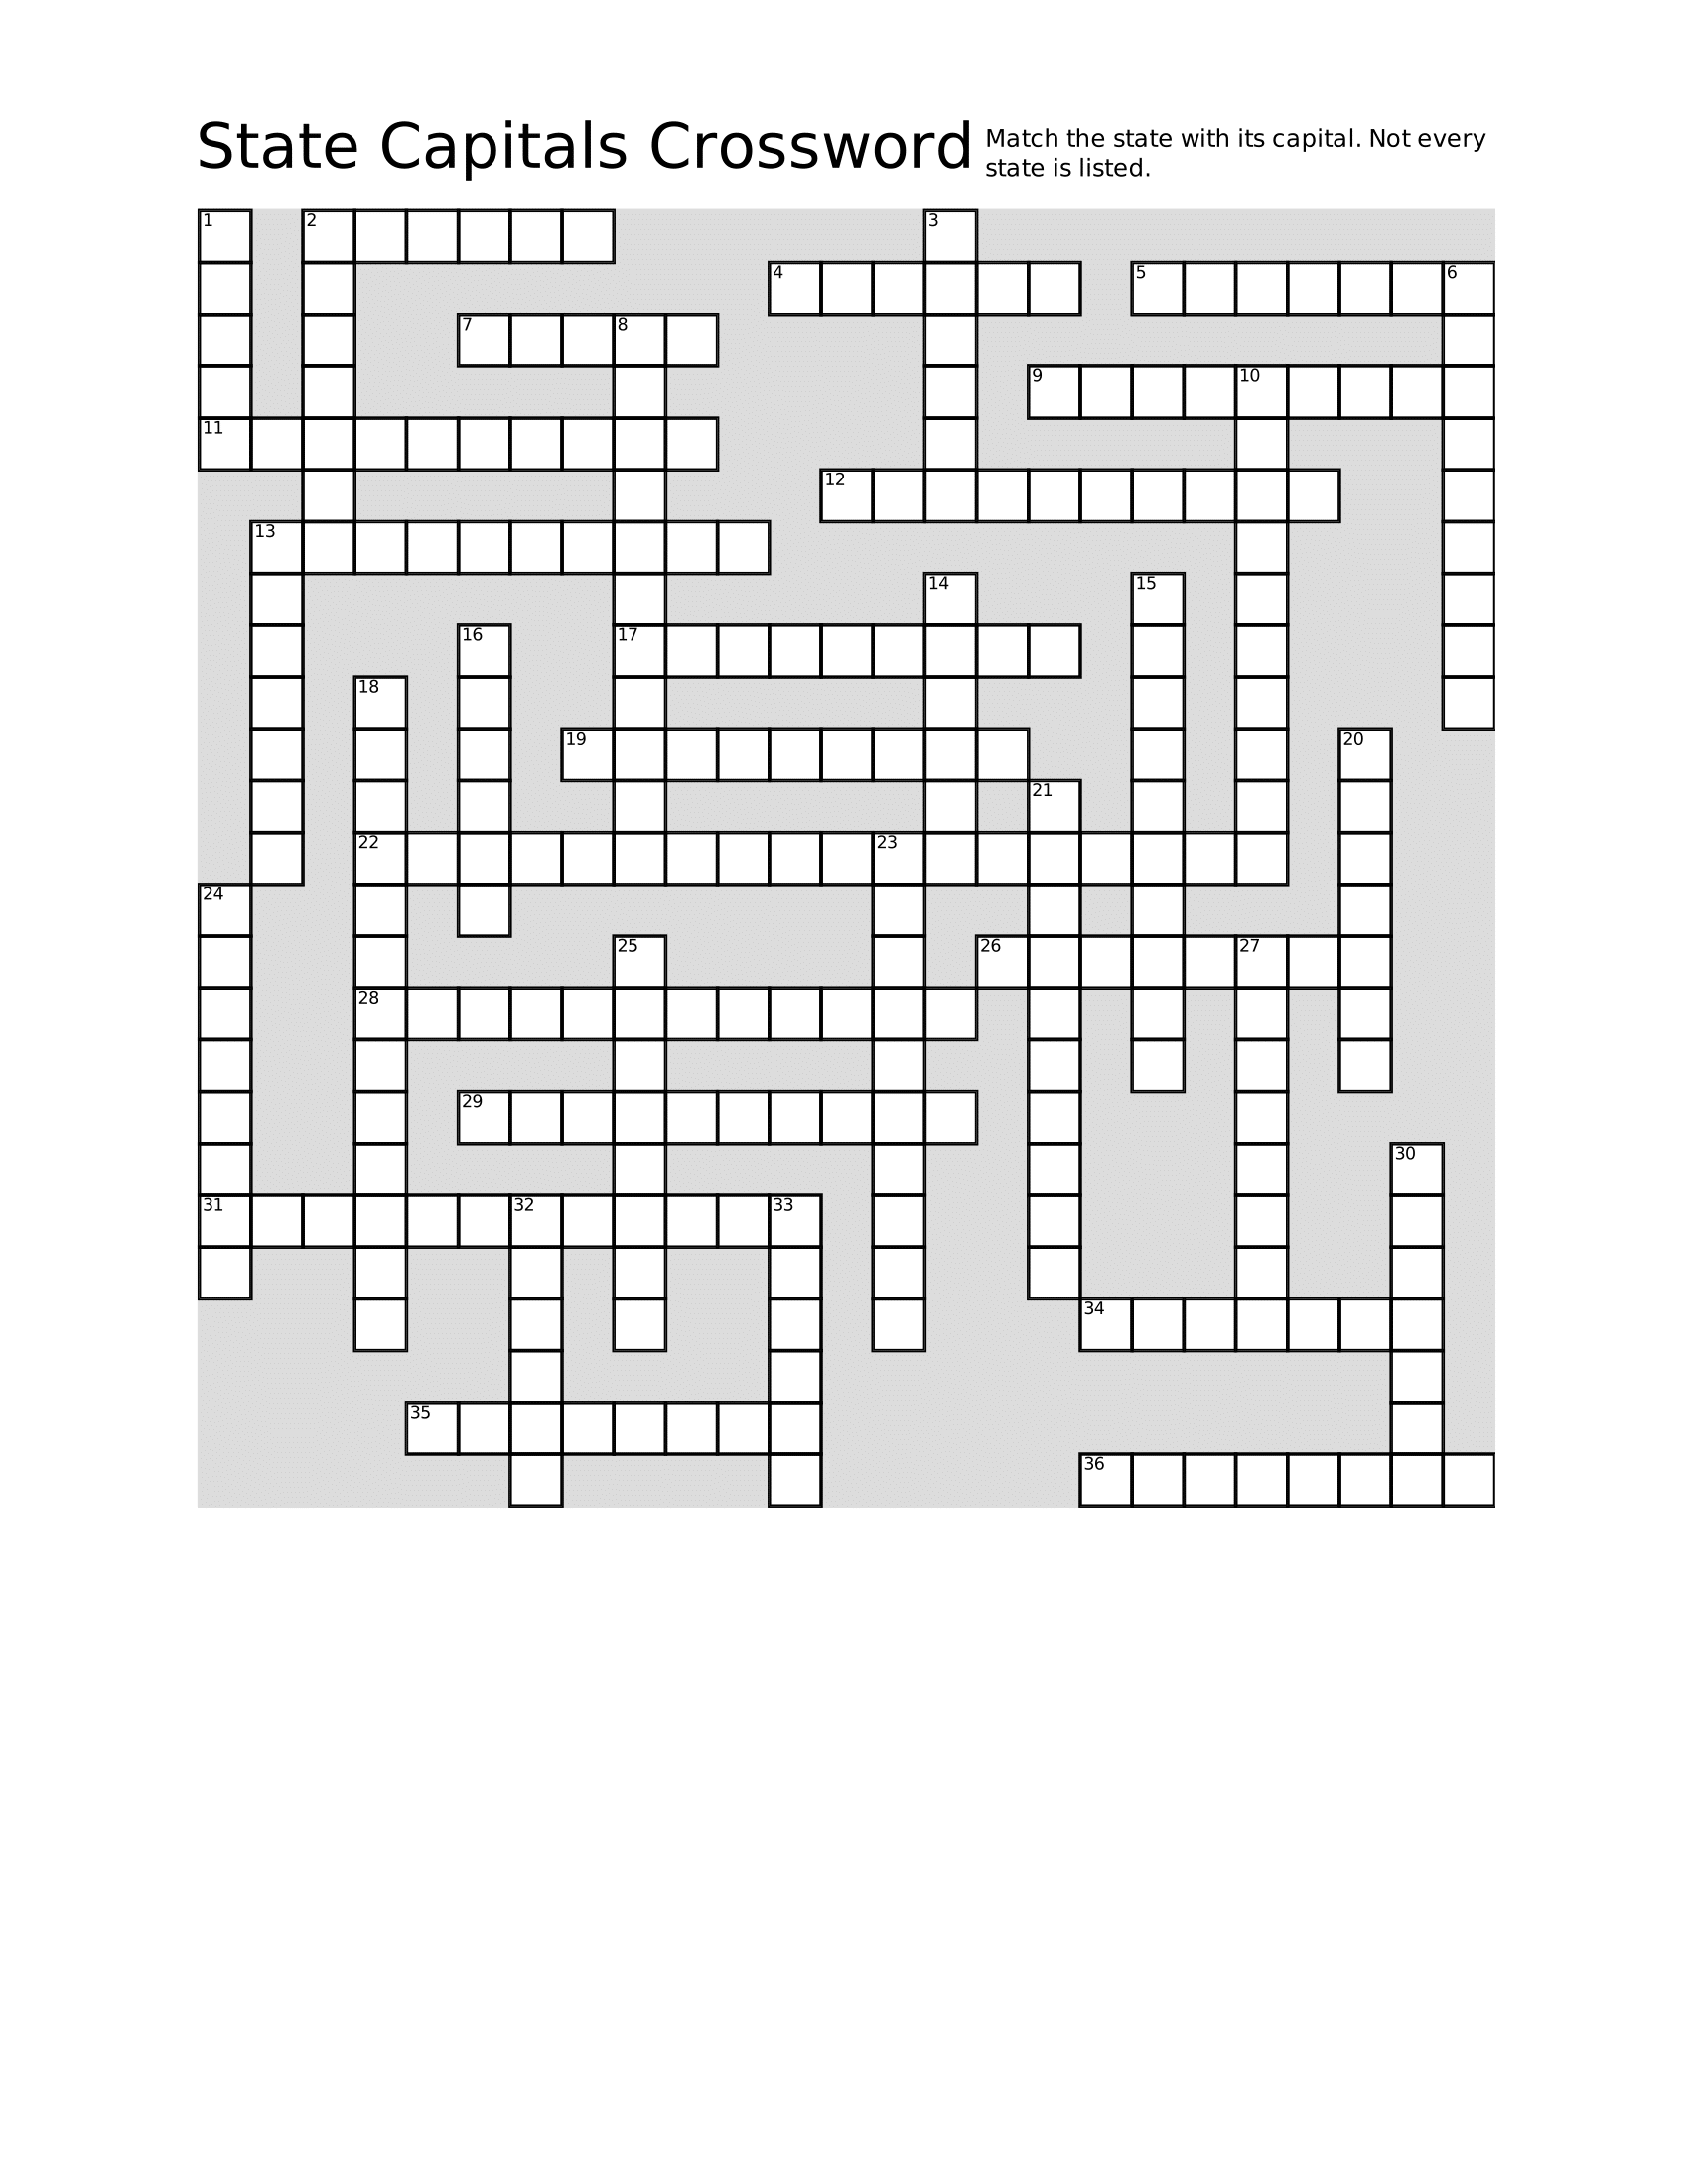 Download, Print, And Solve This State Capitals Crossword For